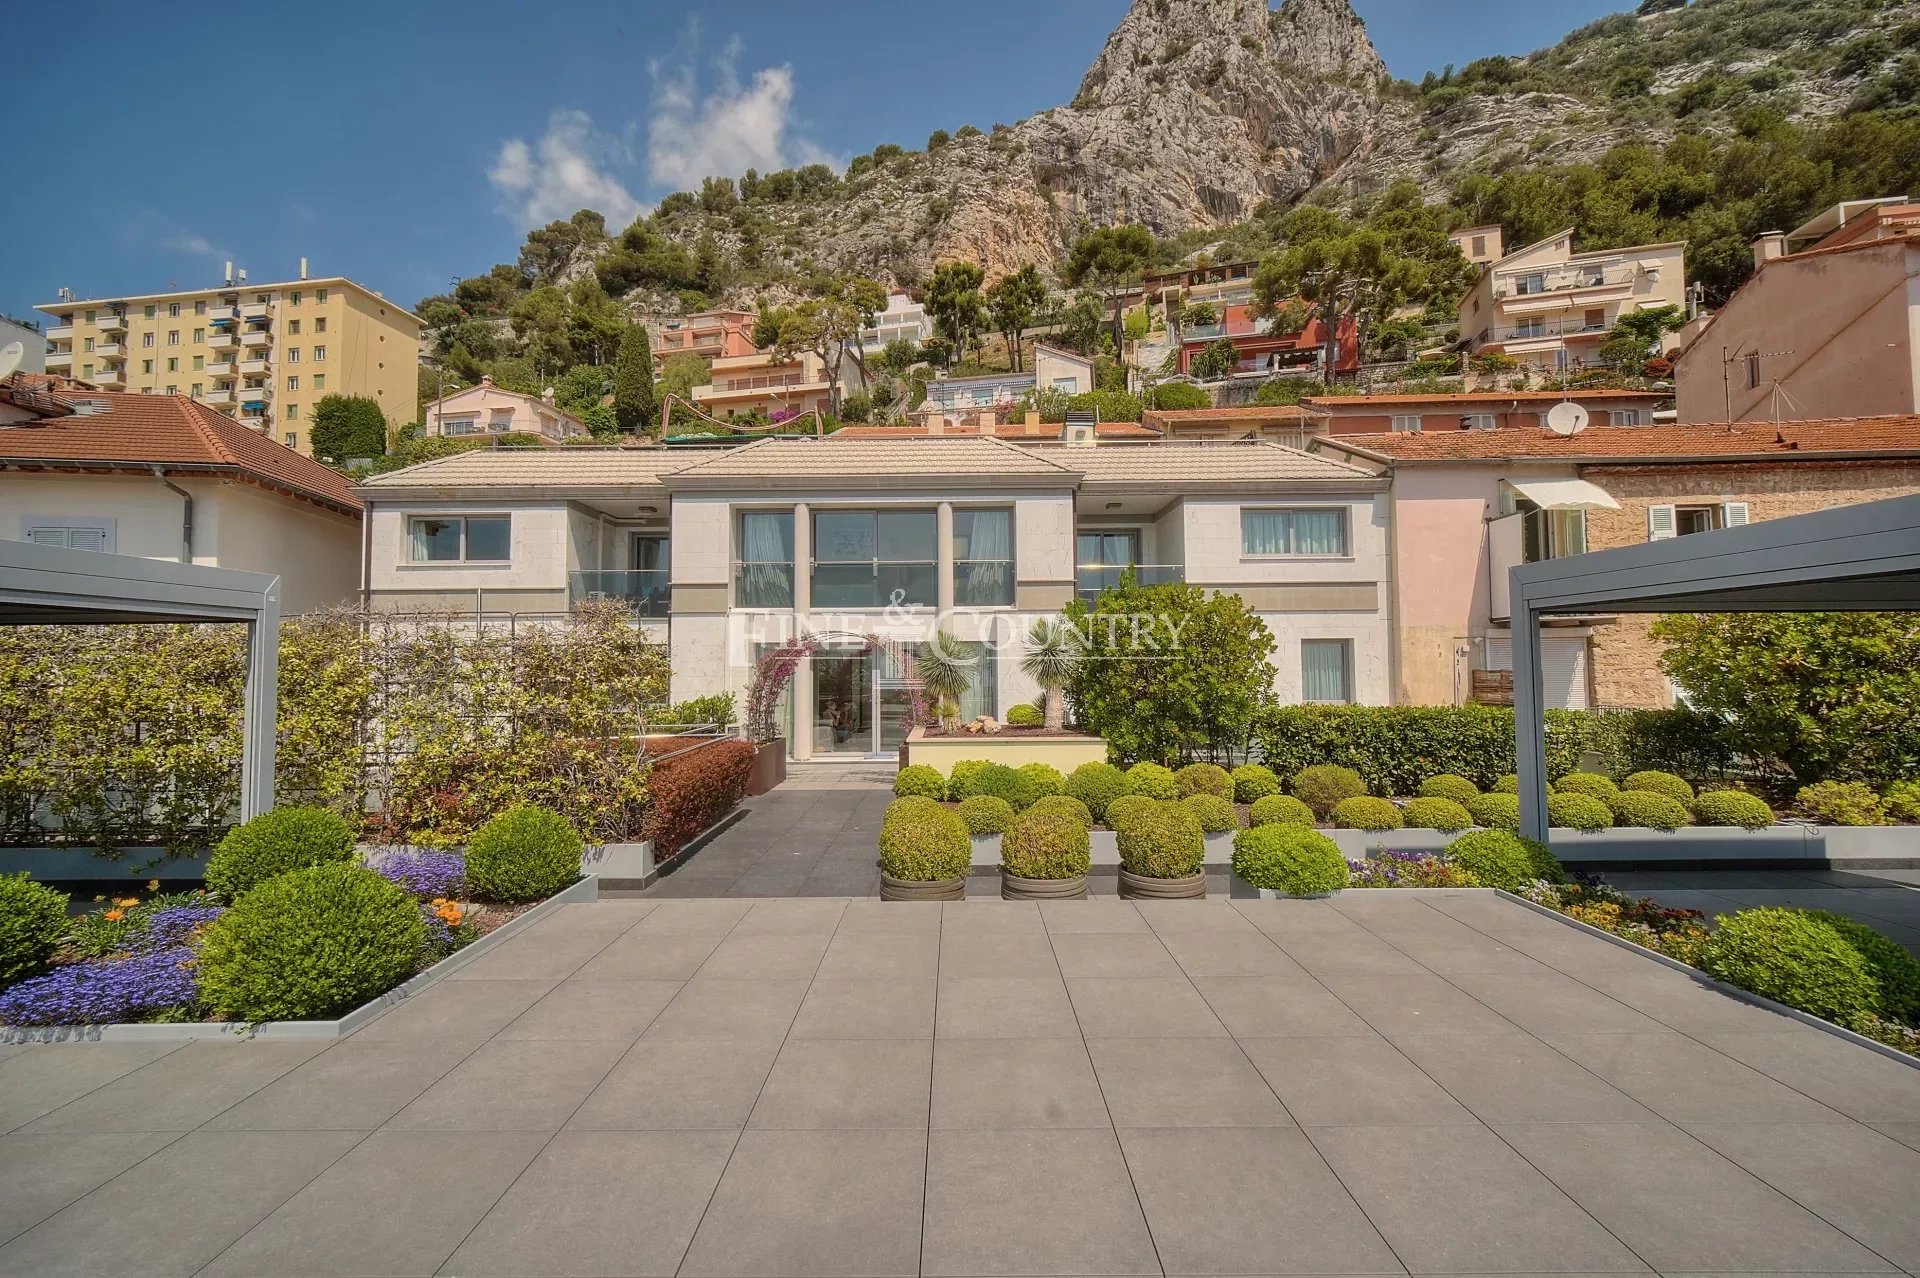 Penthouse-Villa for sale on the edge of Monaco, with sea Views